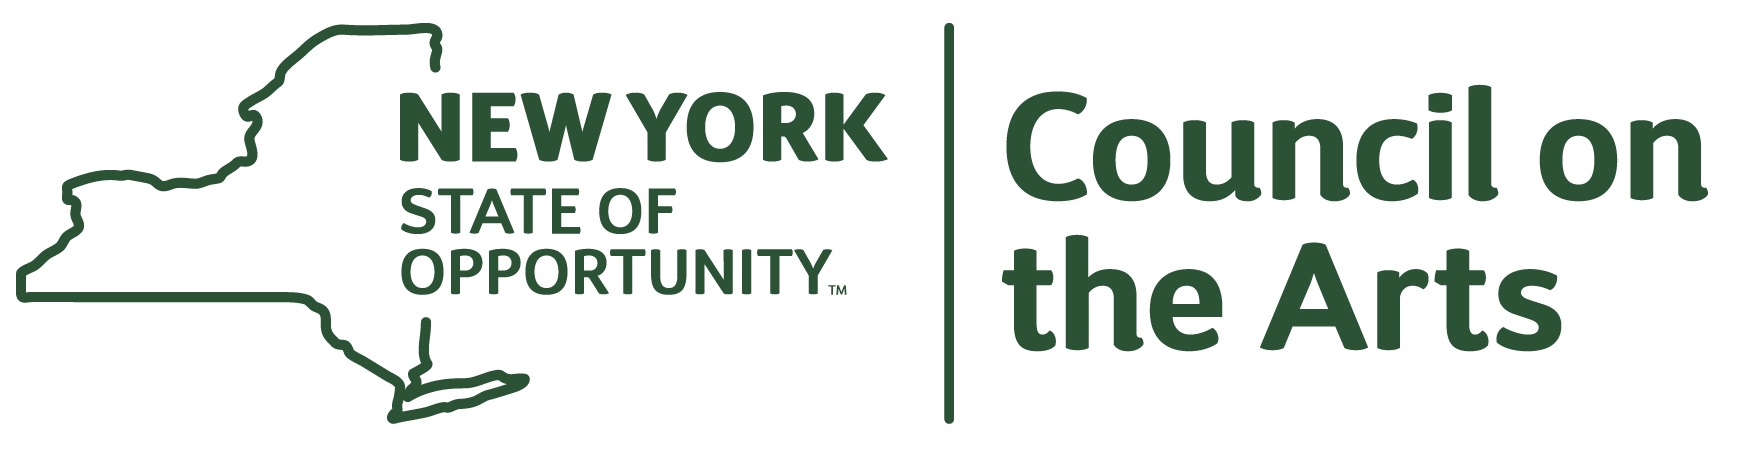 New York State Of Opportunity Council on the Arts